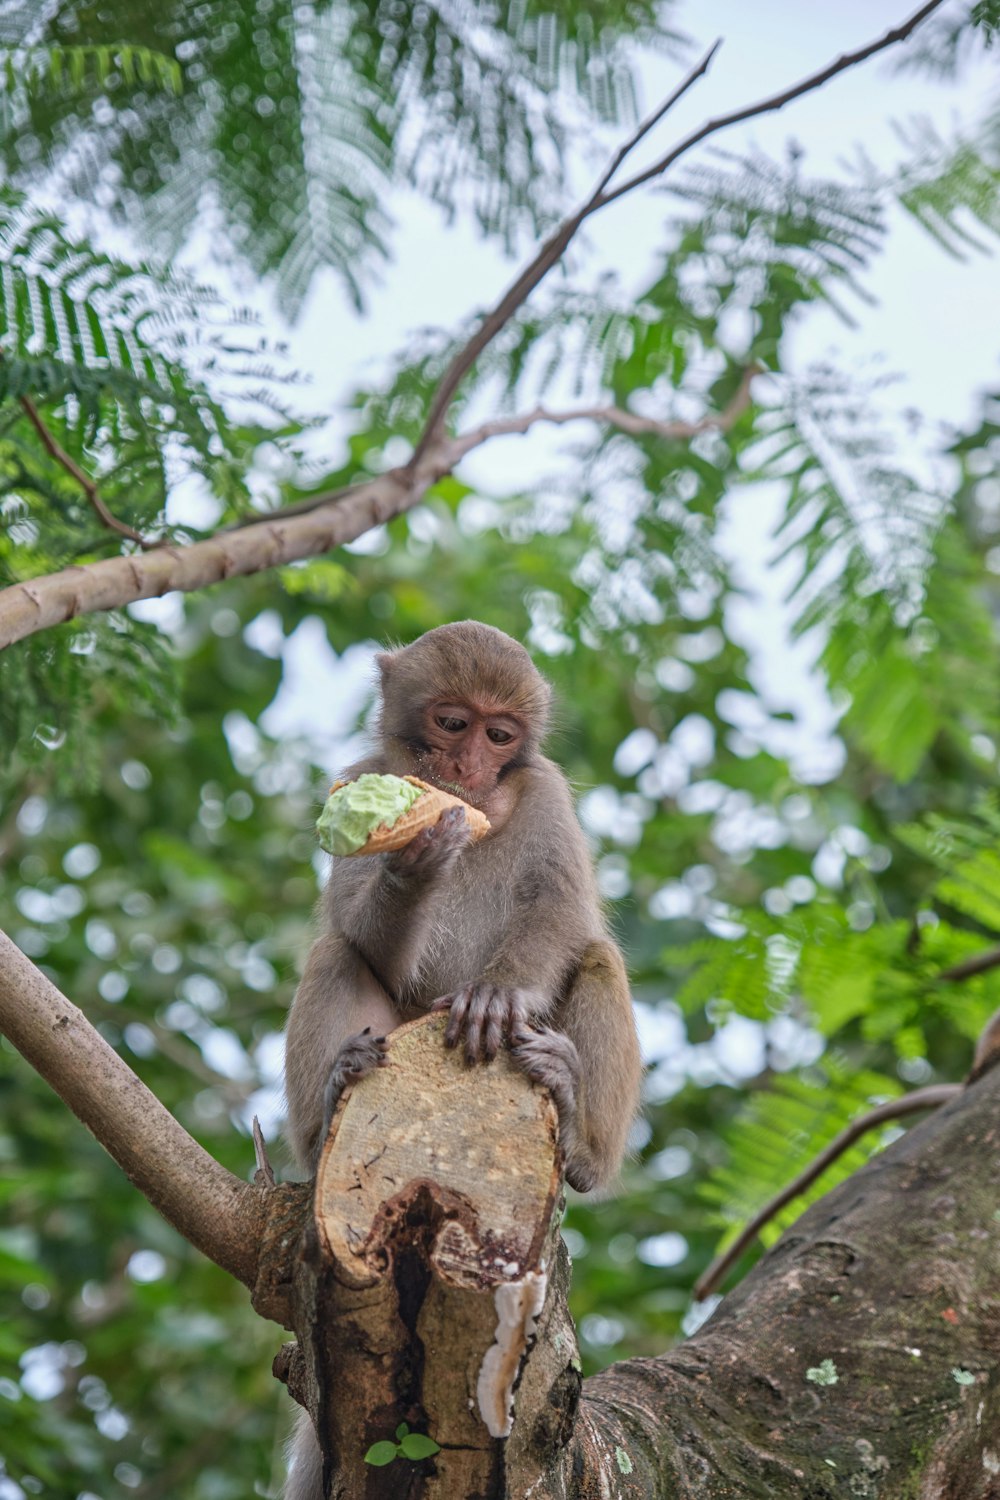 a monkey sitting on top of a tree branch eating a piece of food